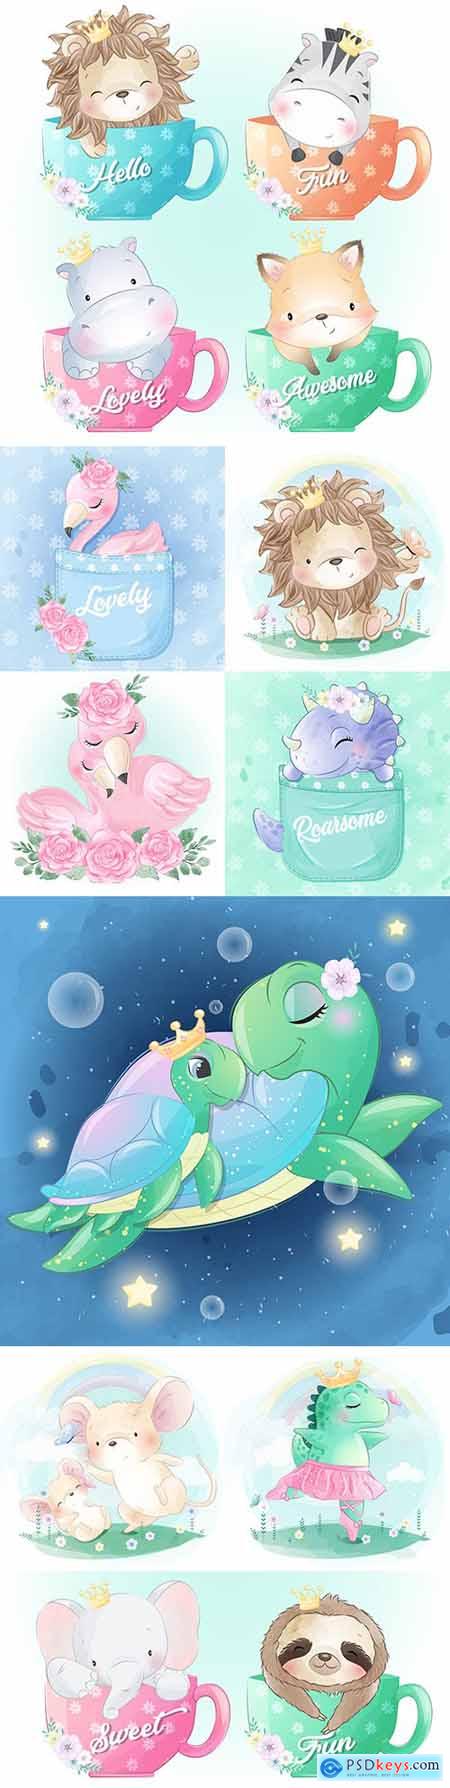 Funny animals cartoon watercolor with flowers illustrations 36